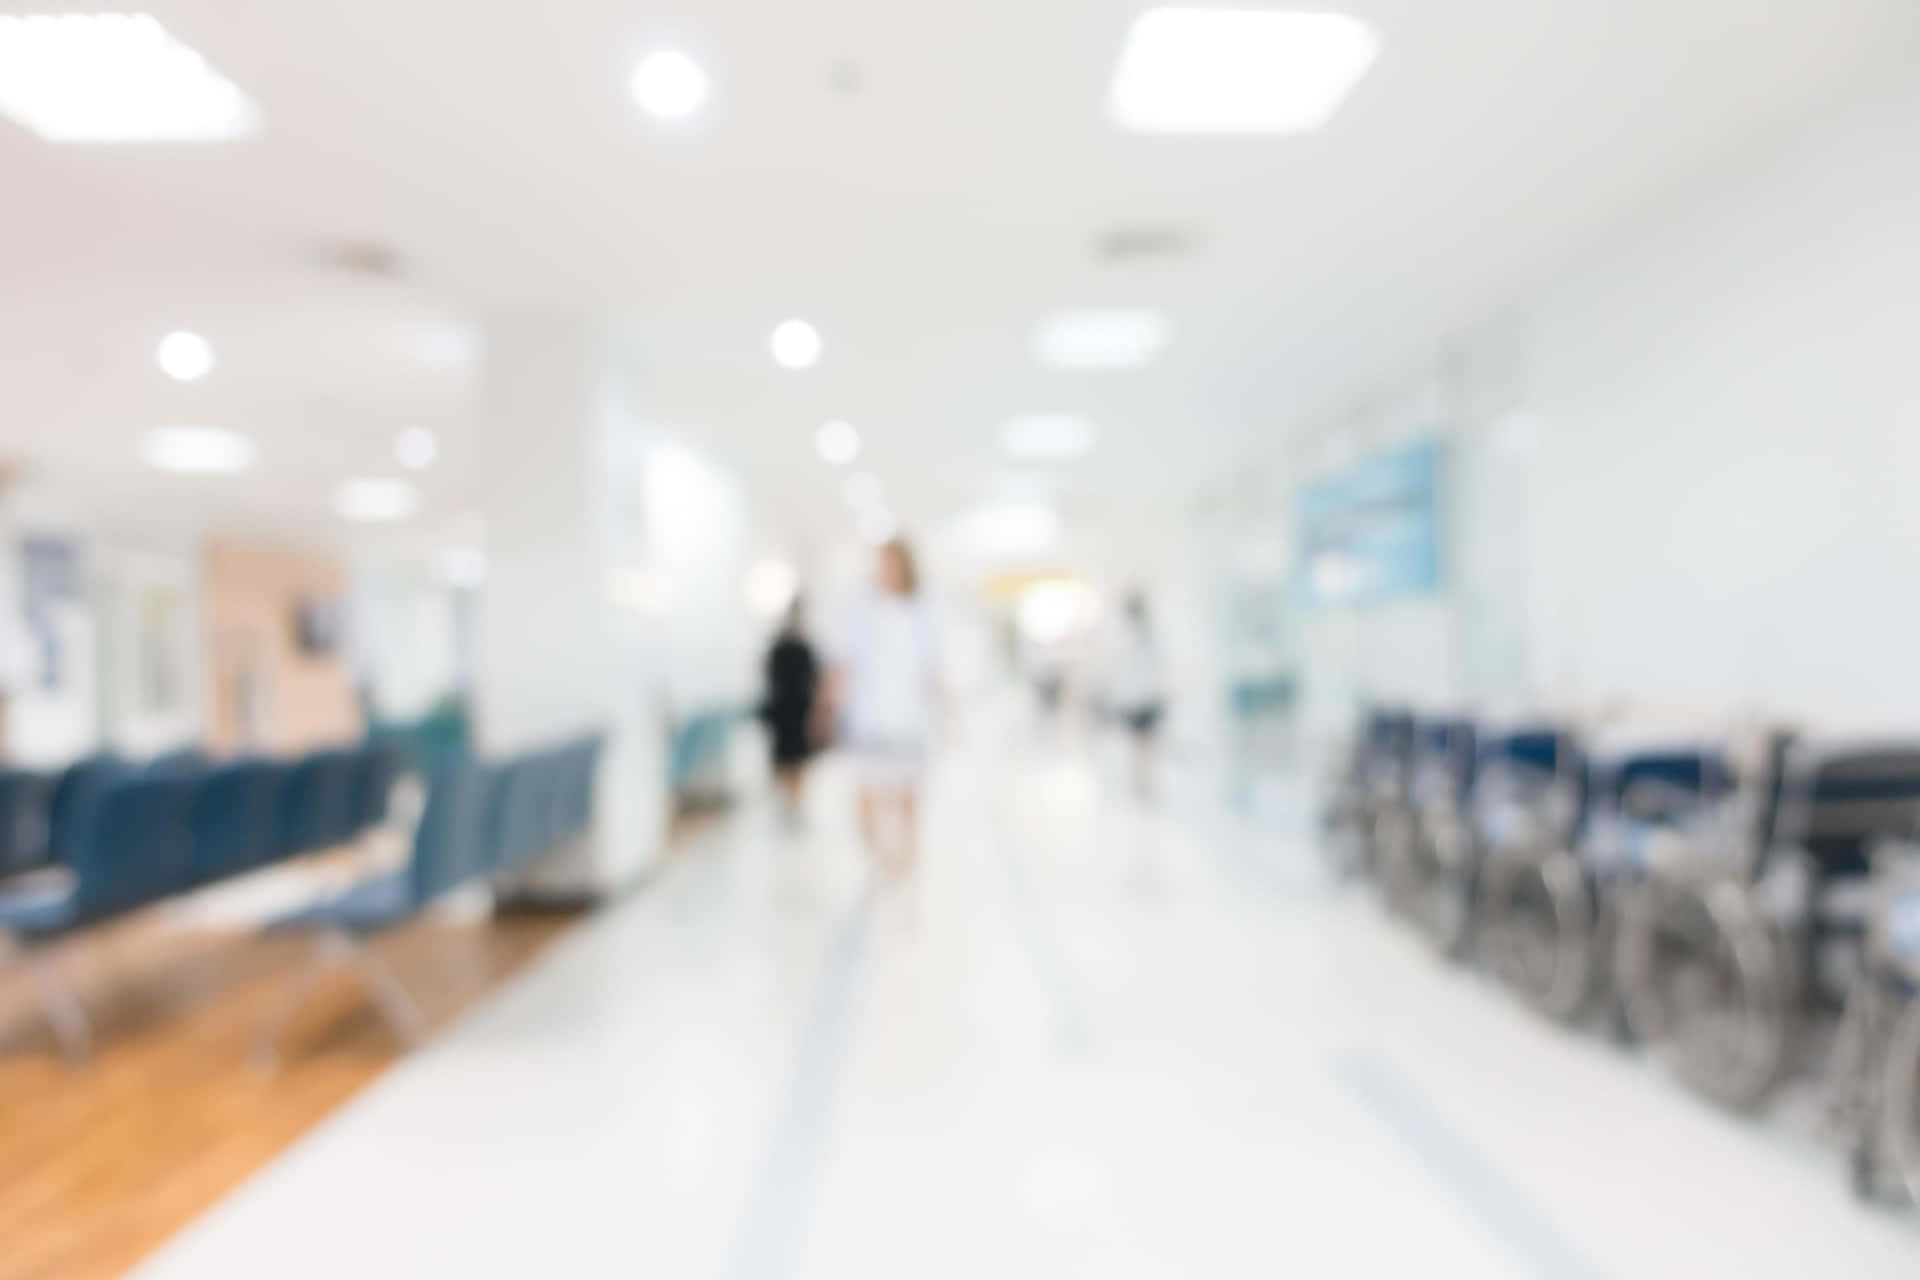 Blurred Image Of A Hospital Hallway With People Walking Down It